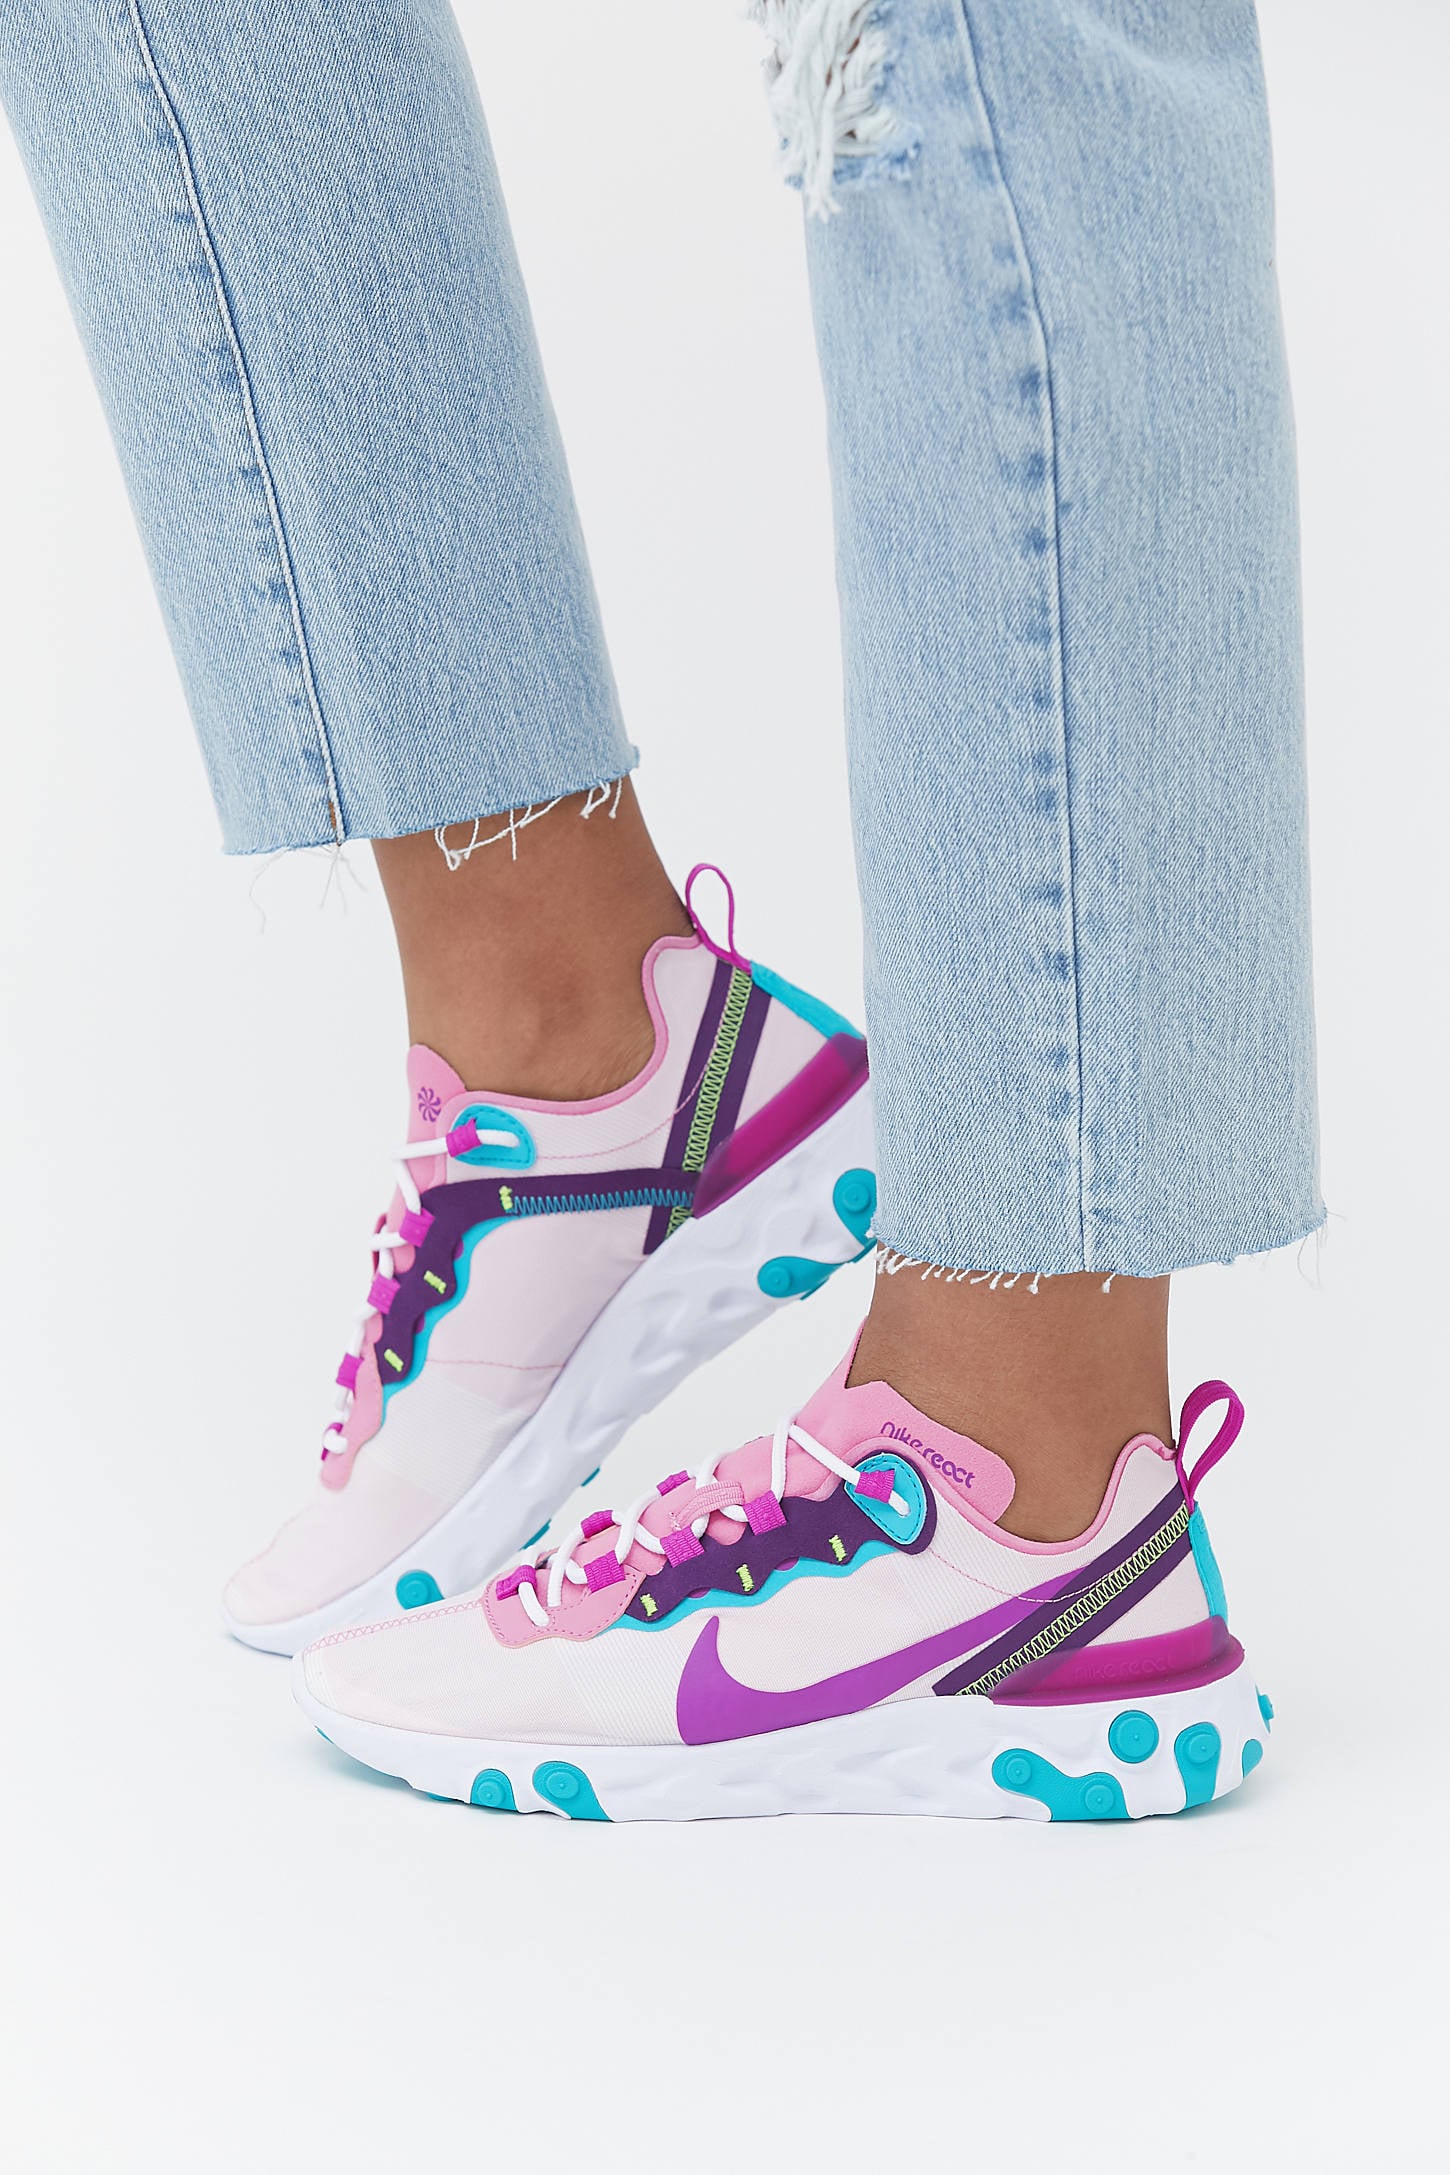 nike pink and purple shoes